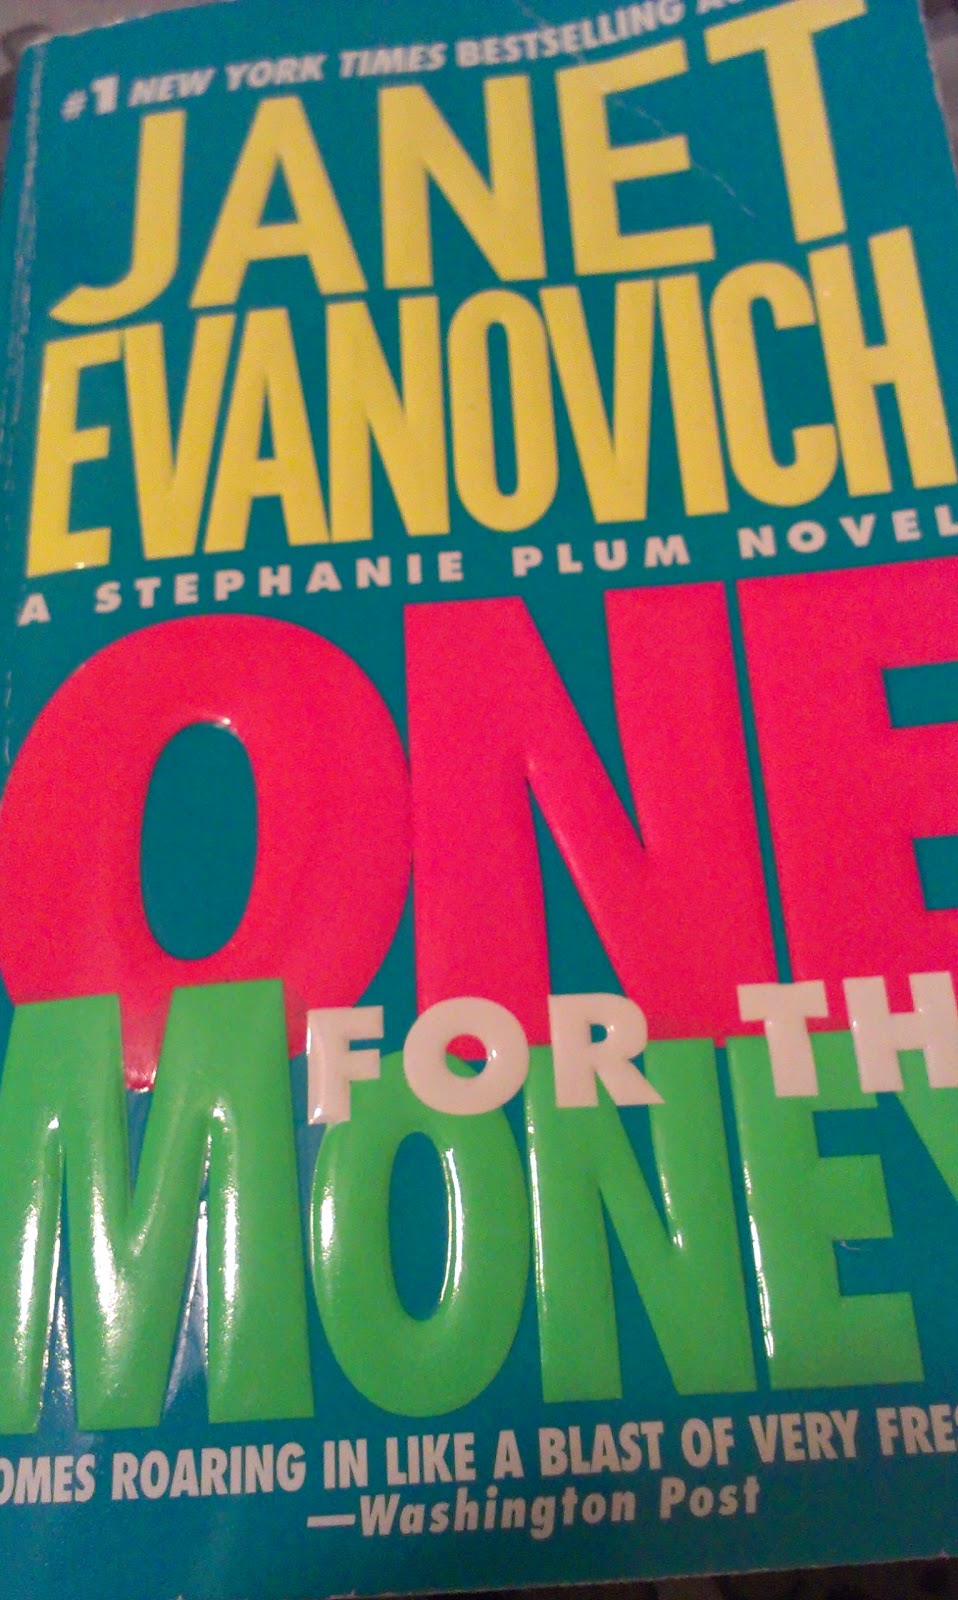 janet evanovich series one for the money